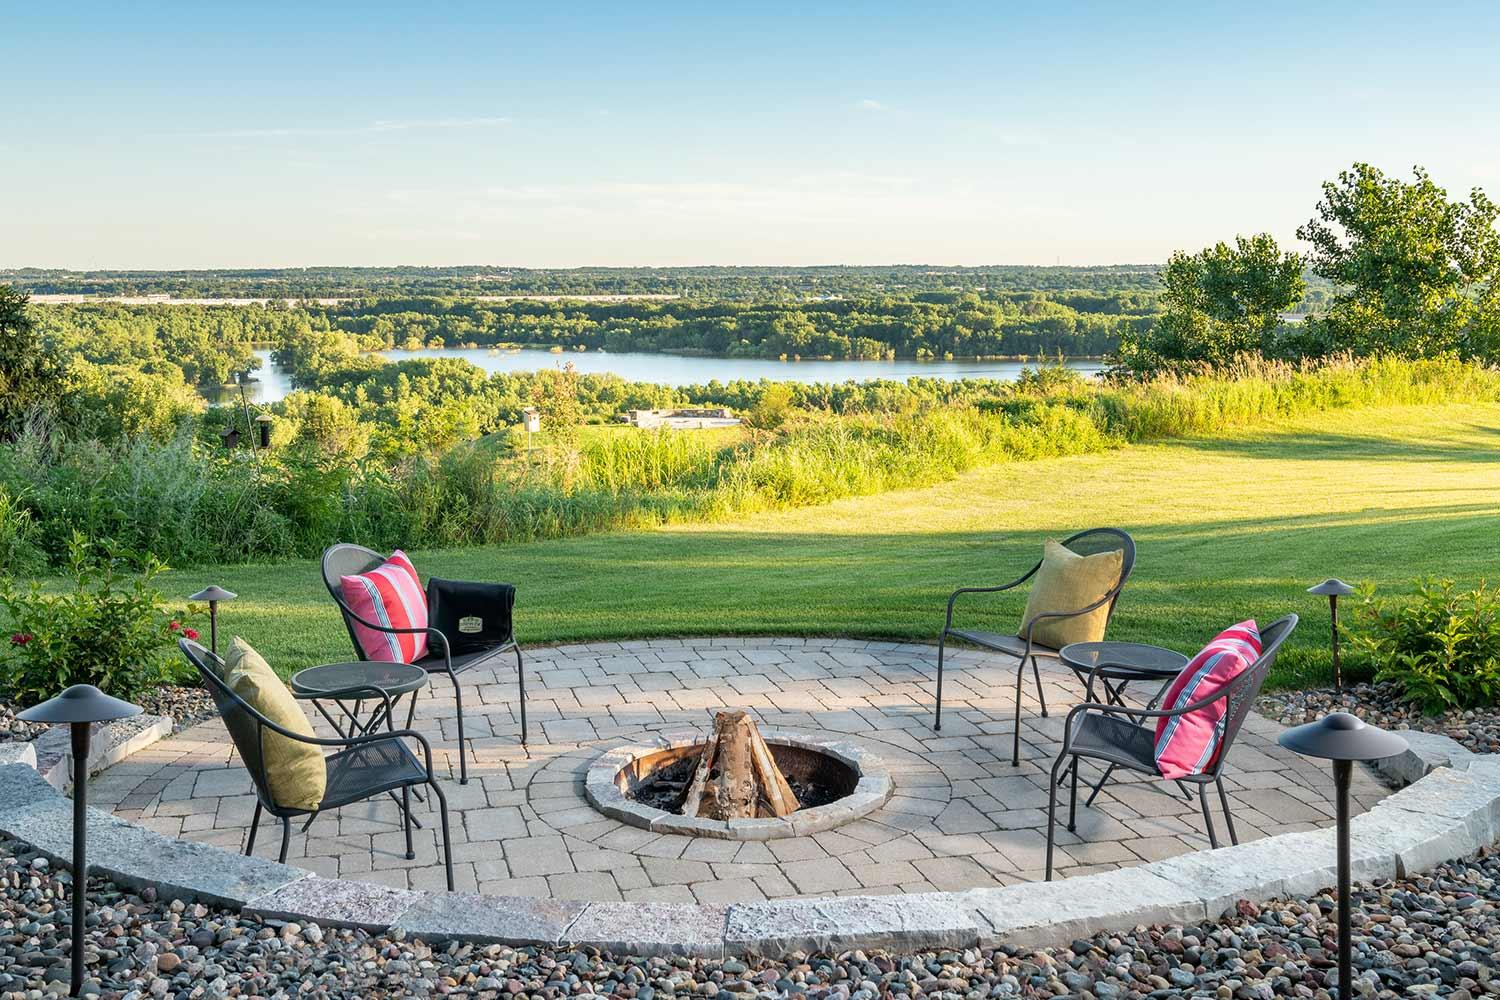 wood-burning fire pit overlooking the minnesota river in eden prairie, mn